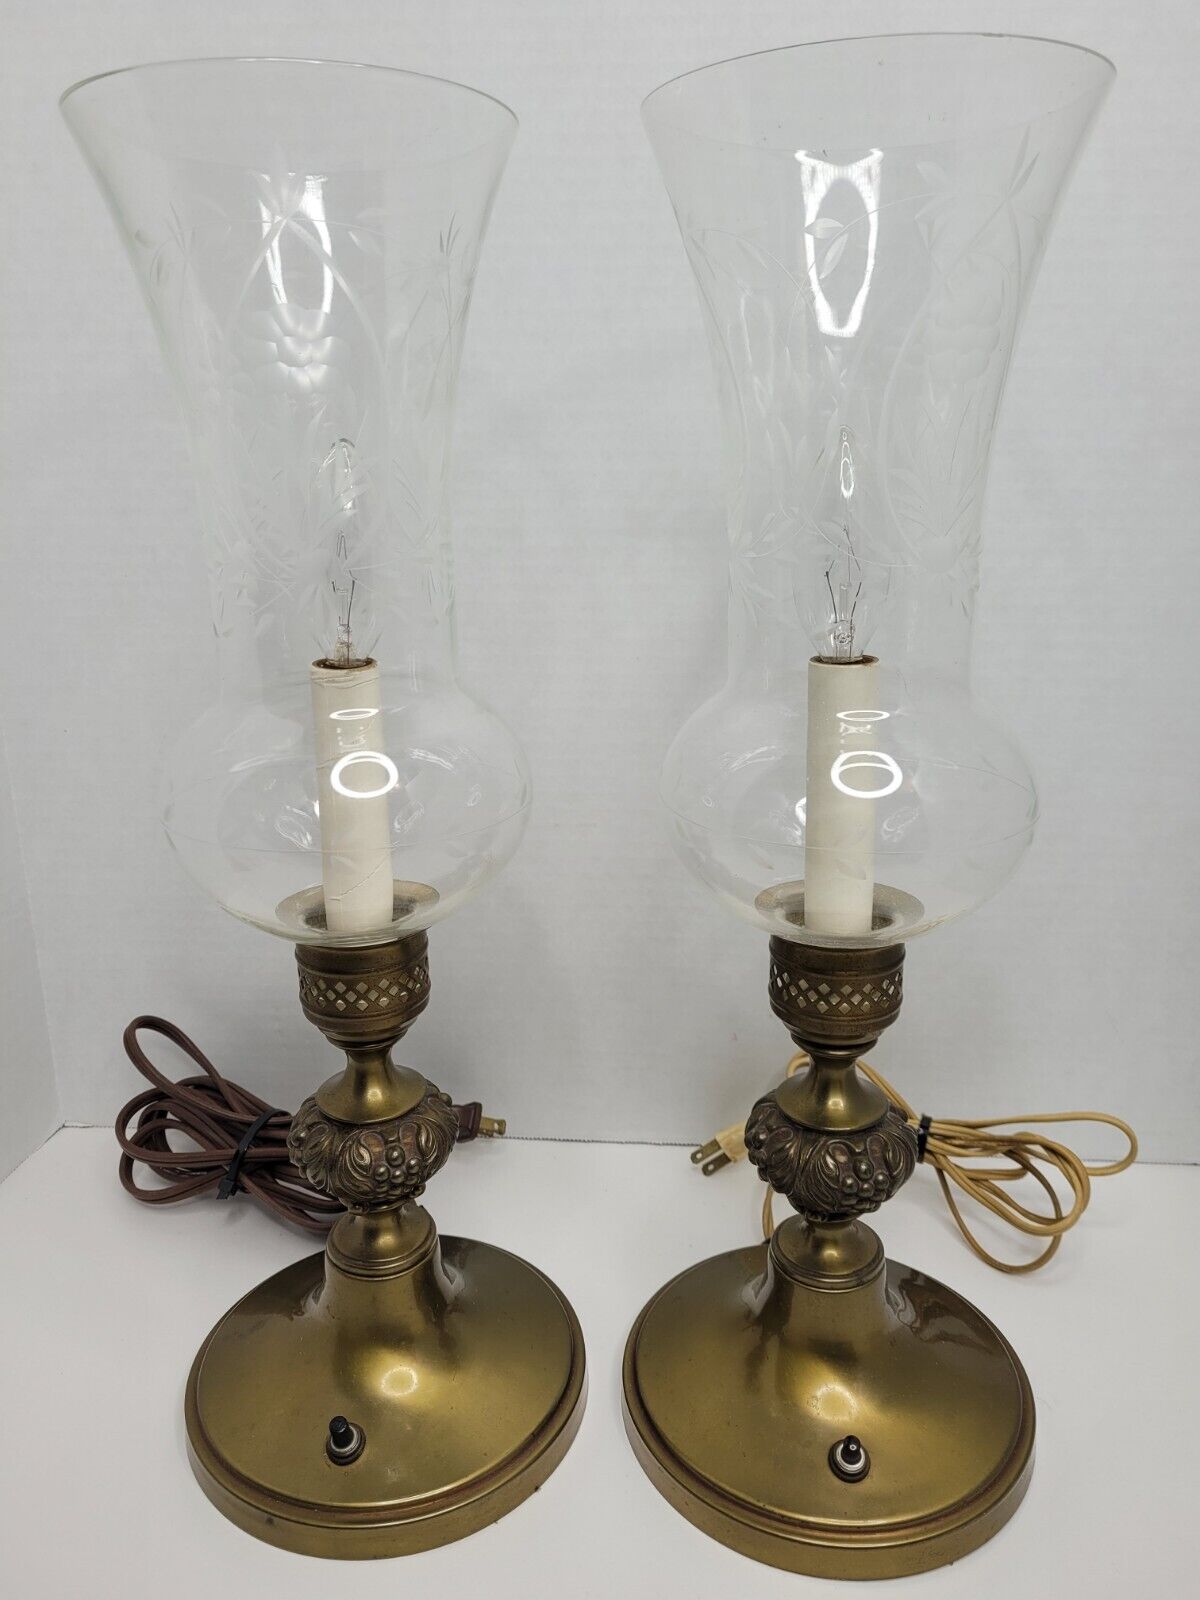 PAIR Vtg Antique Etched Glass Hurricane Mantle Boudoir Ornate Brass Lamps Candle